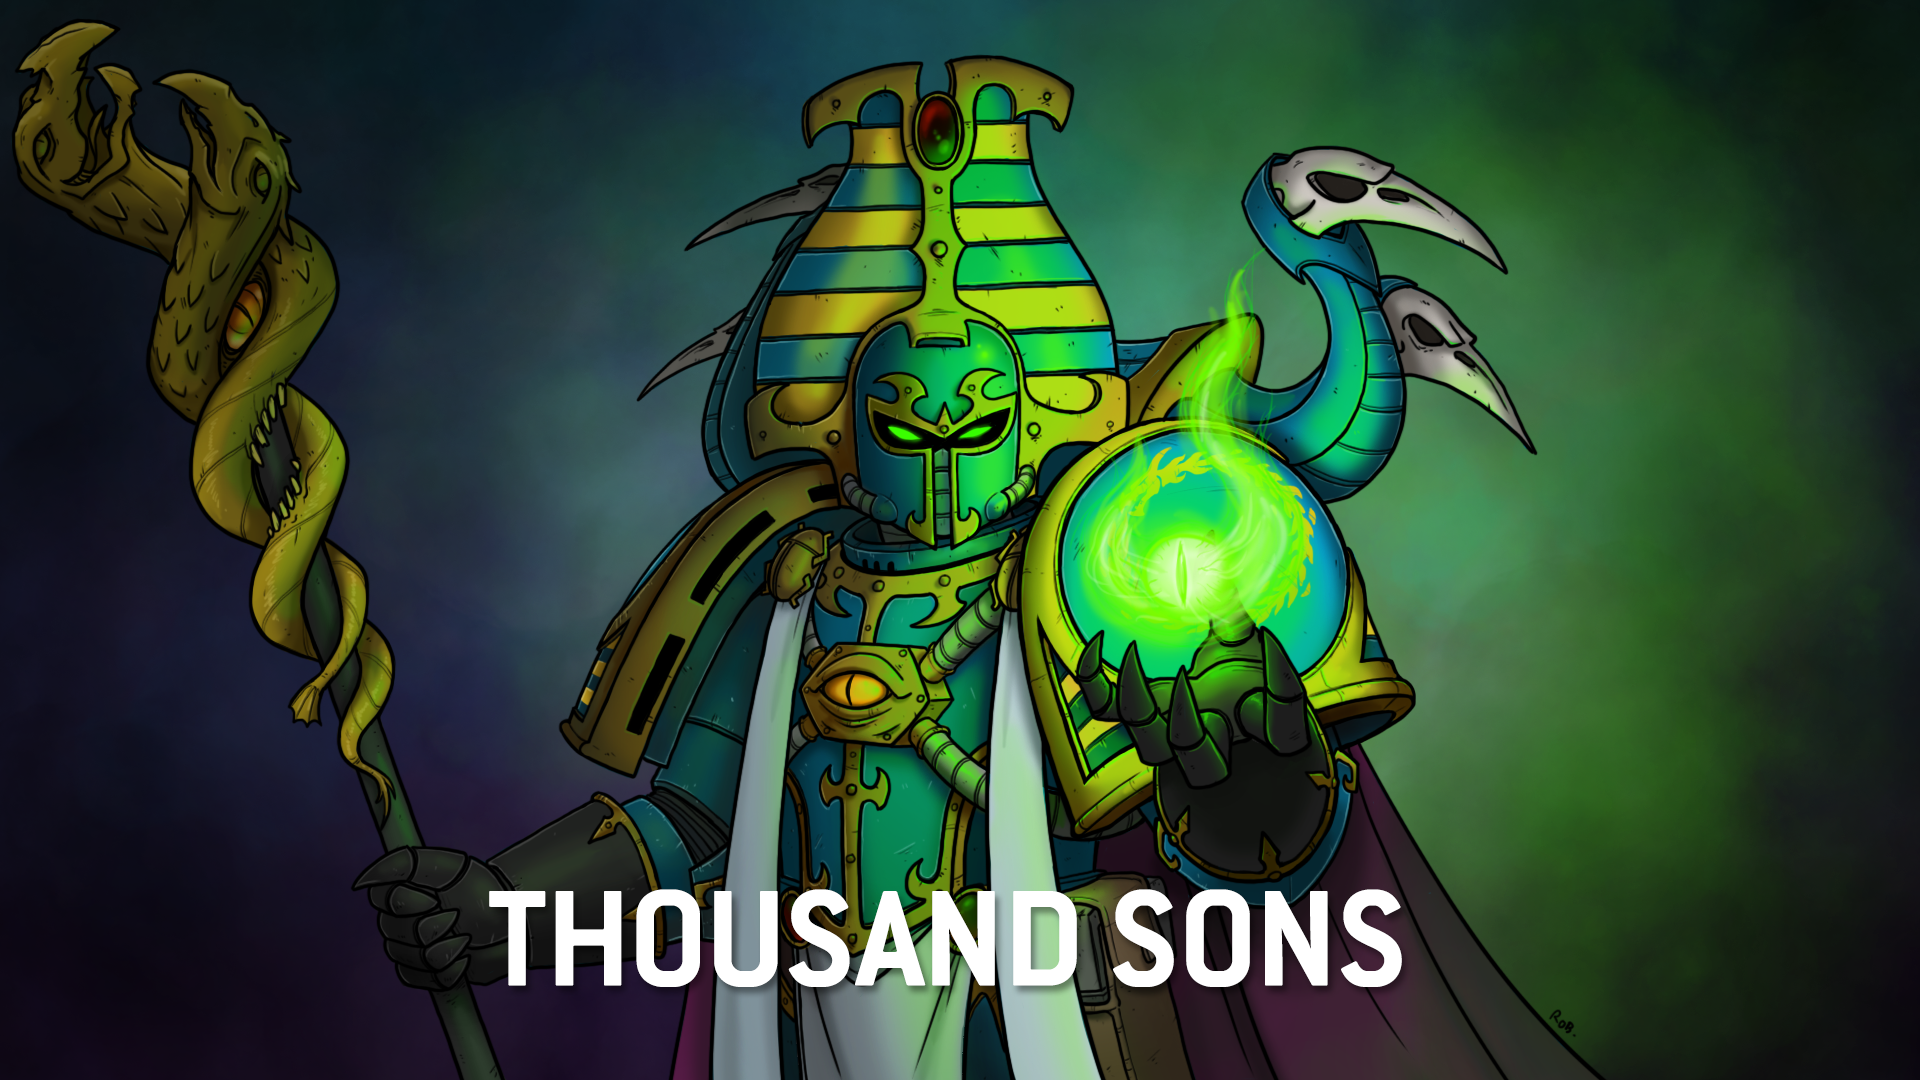 How to Play Thousand Sons in Warhammer 40k - Bell of Lost Souls